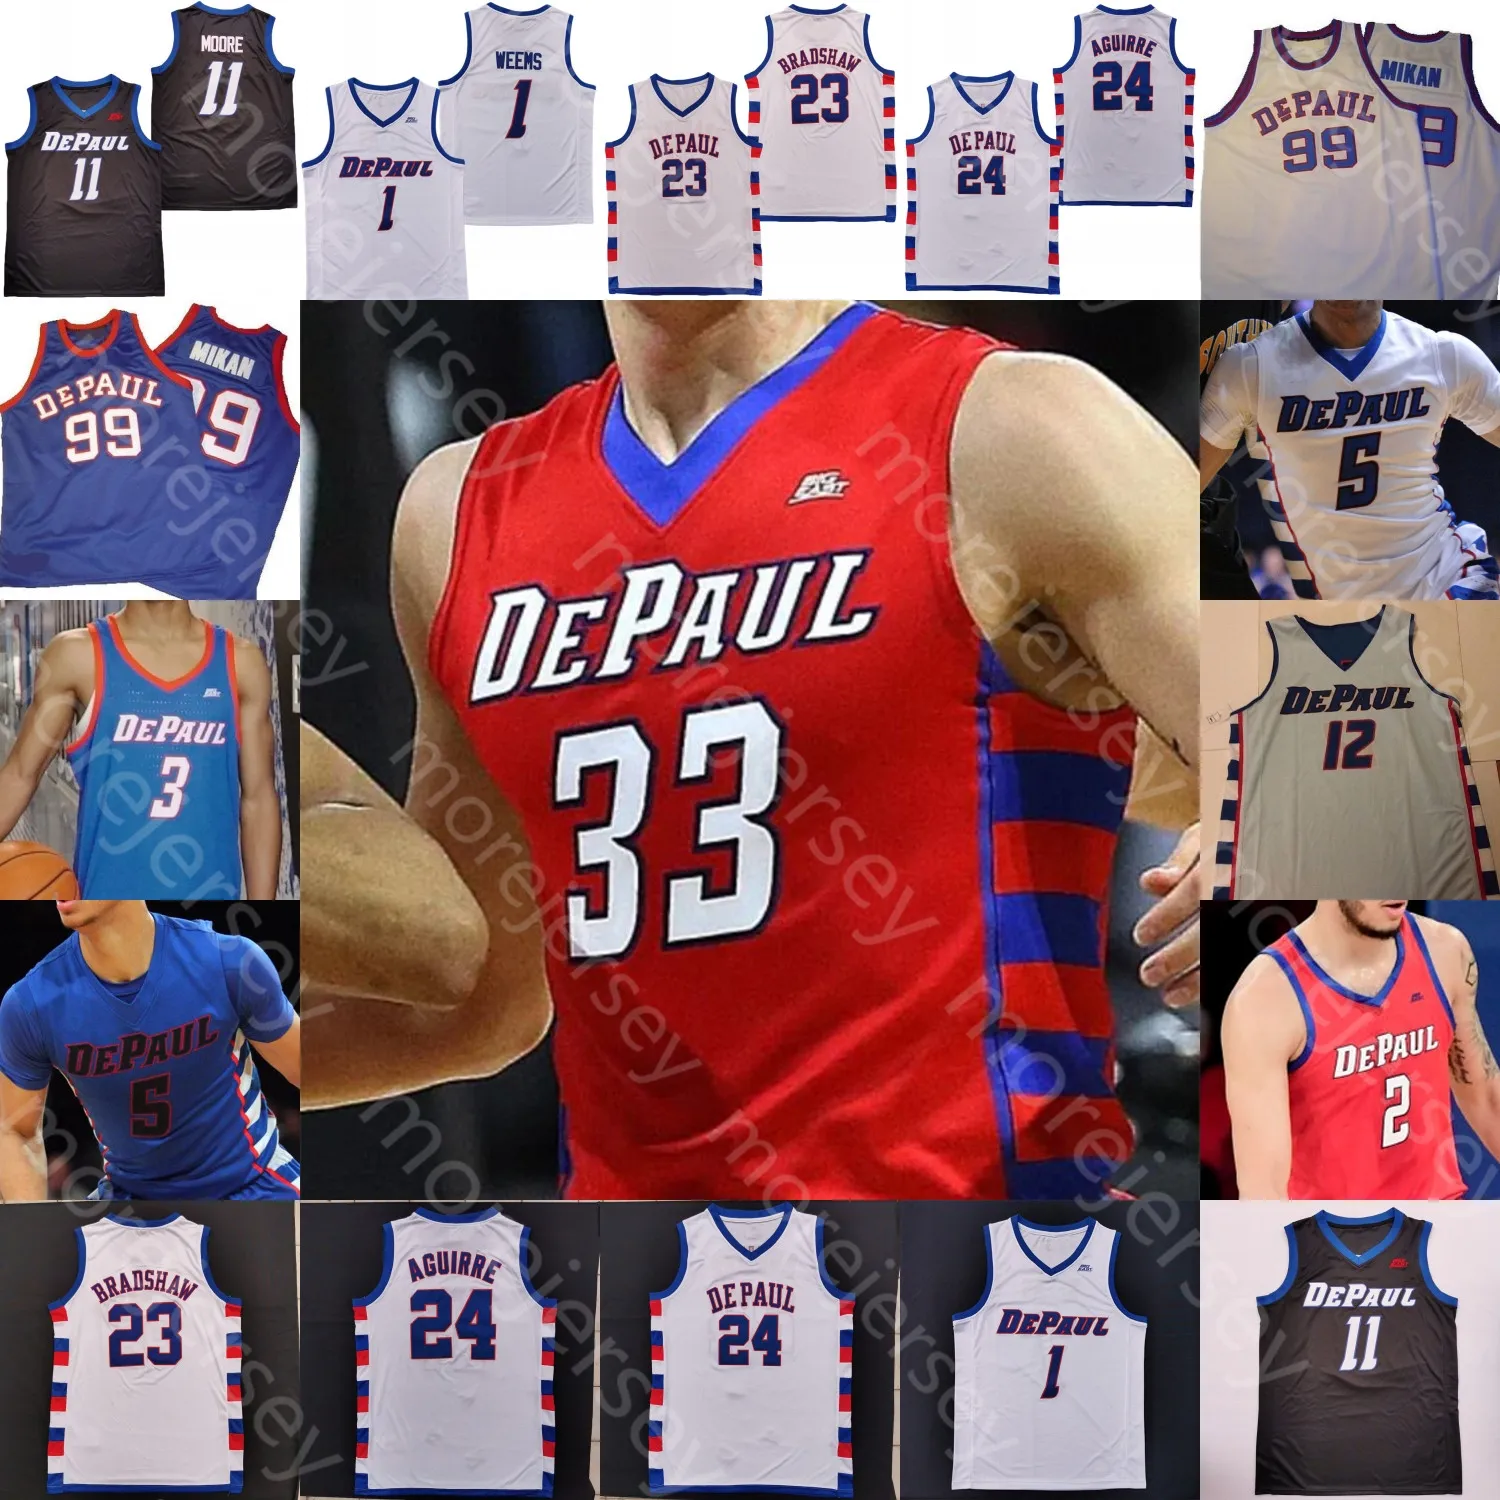 Depaul Blue Demons Basketball Jersey NCAA College Tyon Grant-Foster Courvoisier McCauley Strickland Richardson Simmons Moore Reed Romeo Weems Strus Chandler